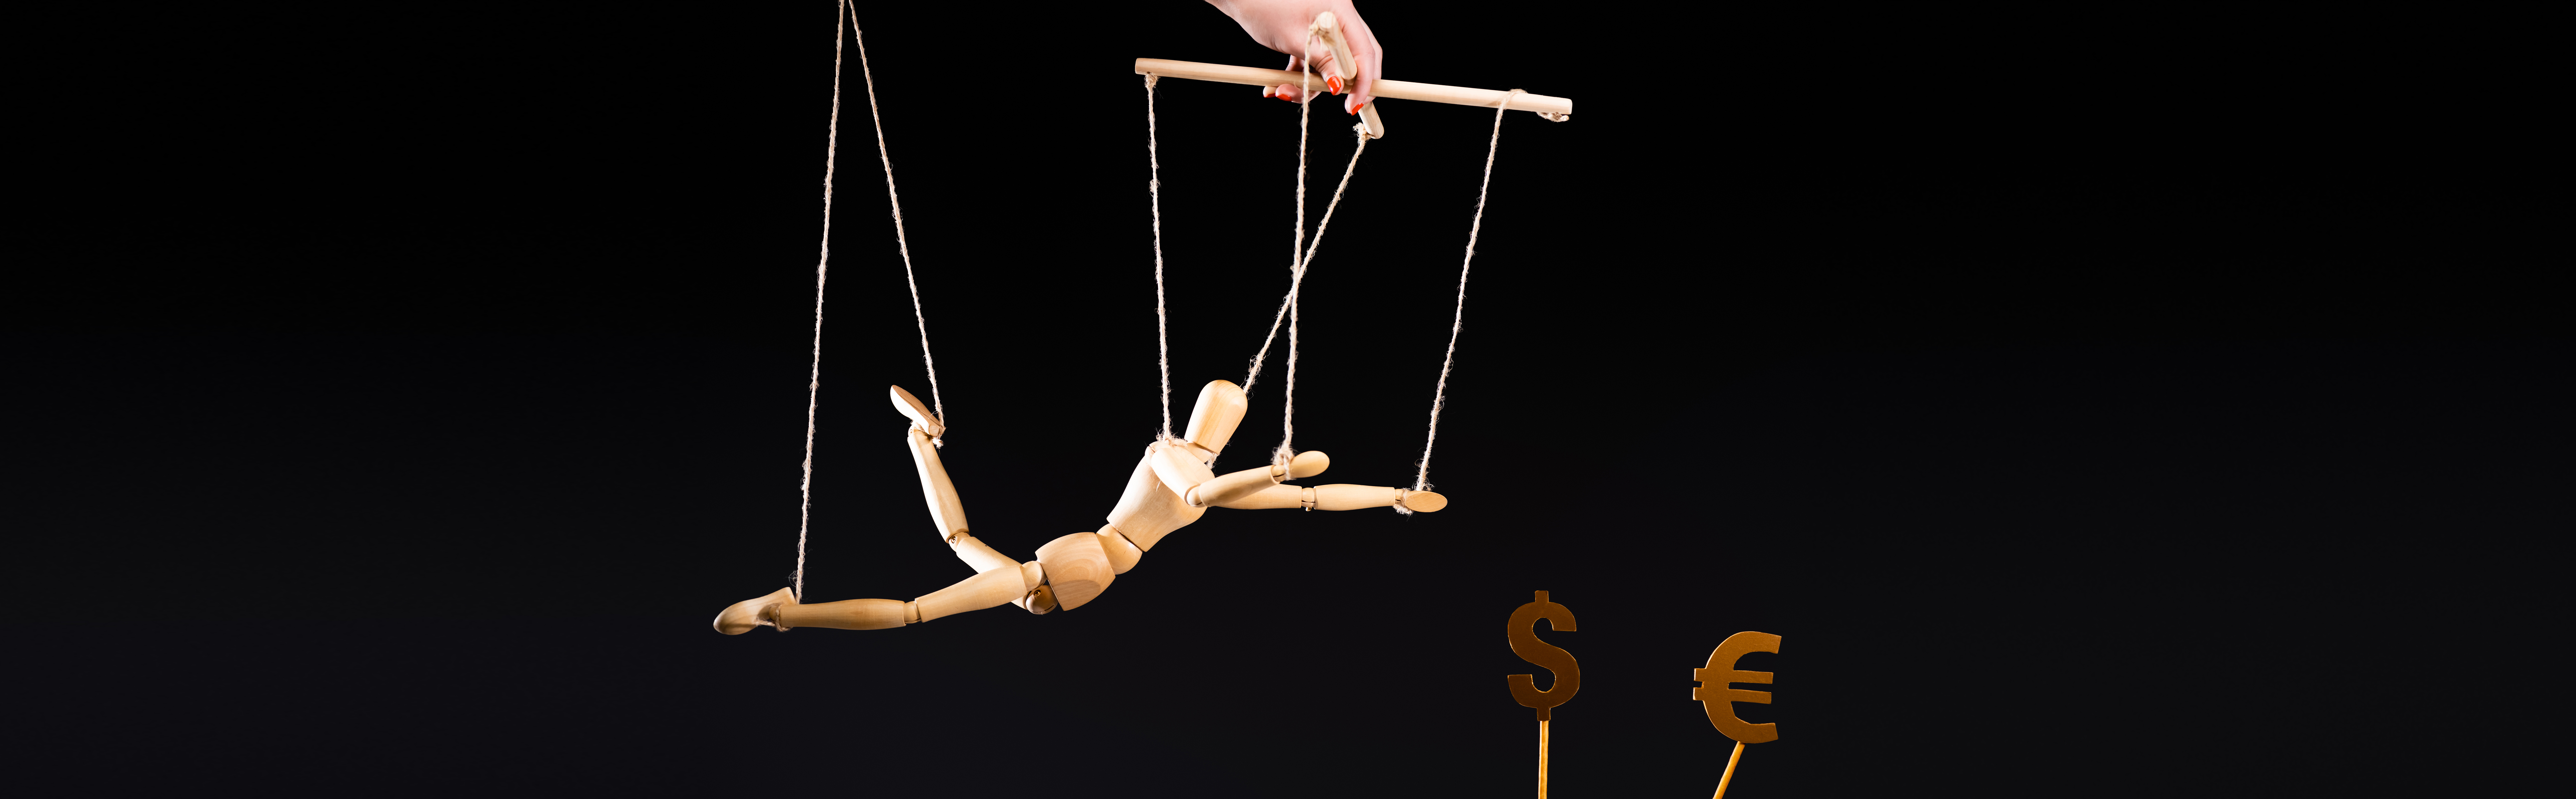 a hand dangles a marionette that reaches toward dollar signs